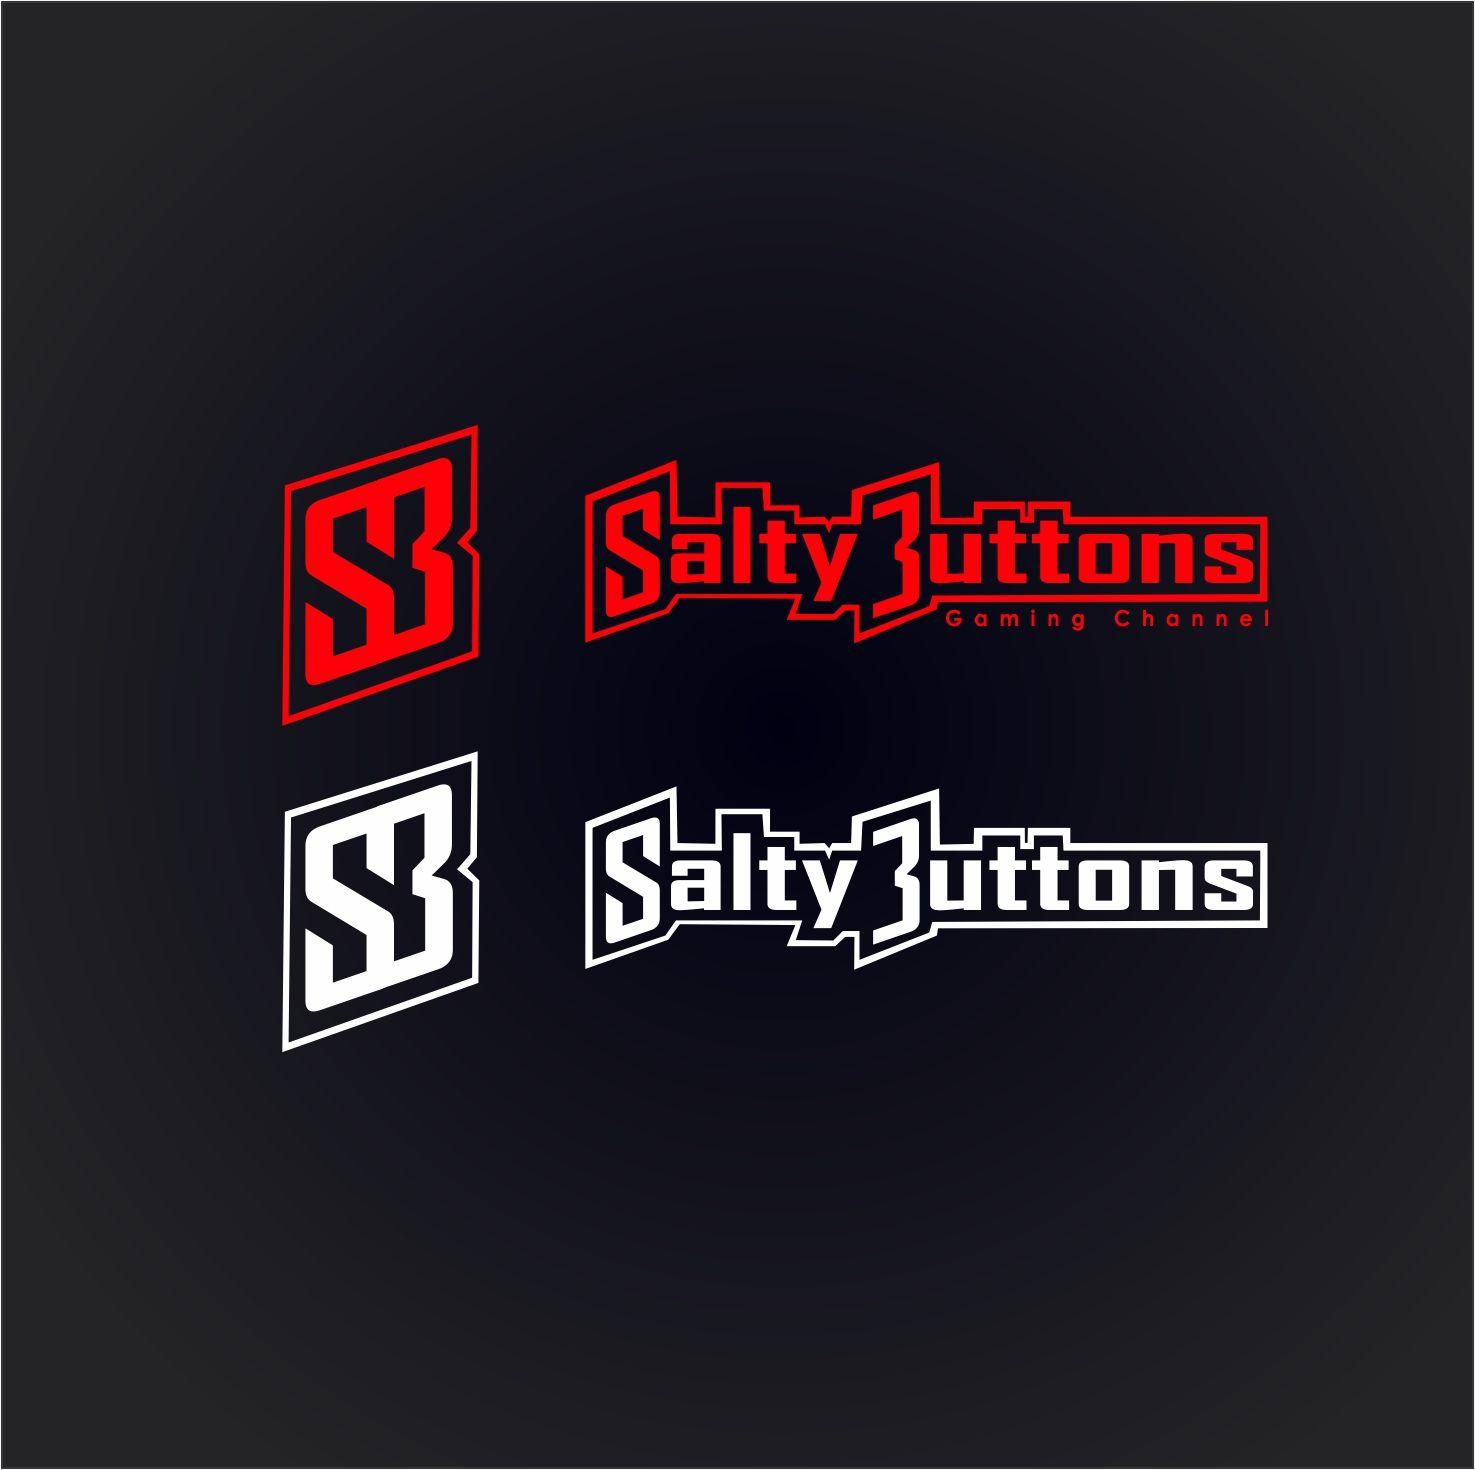 SB Logo - Bold, Playful, Youtube Logo Design for salty_buttons or SB (to ...